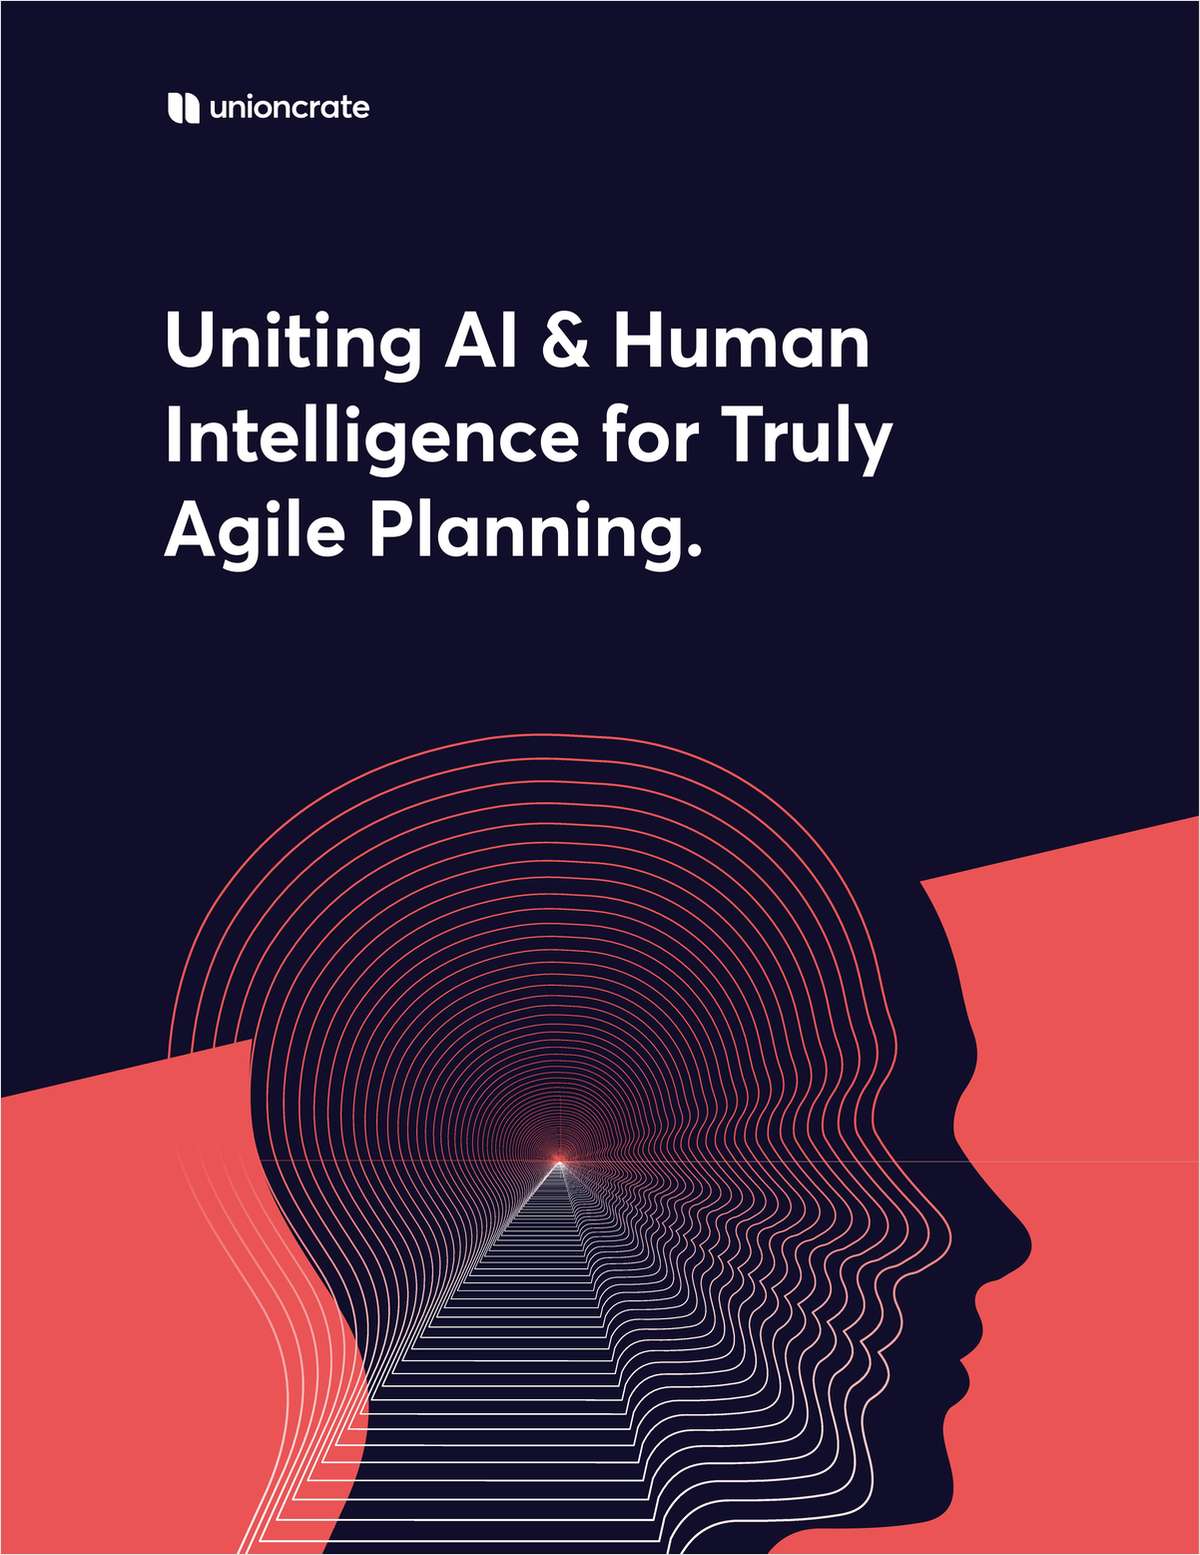 Uniting AI & Human Intelligence for Truly Agile Planning.